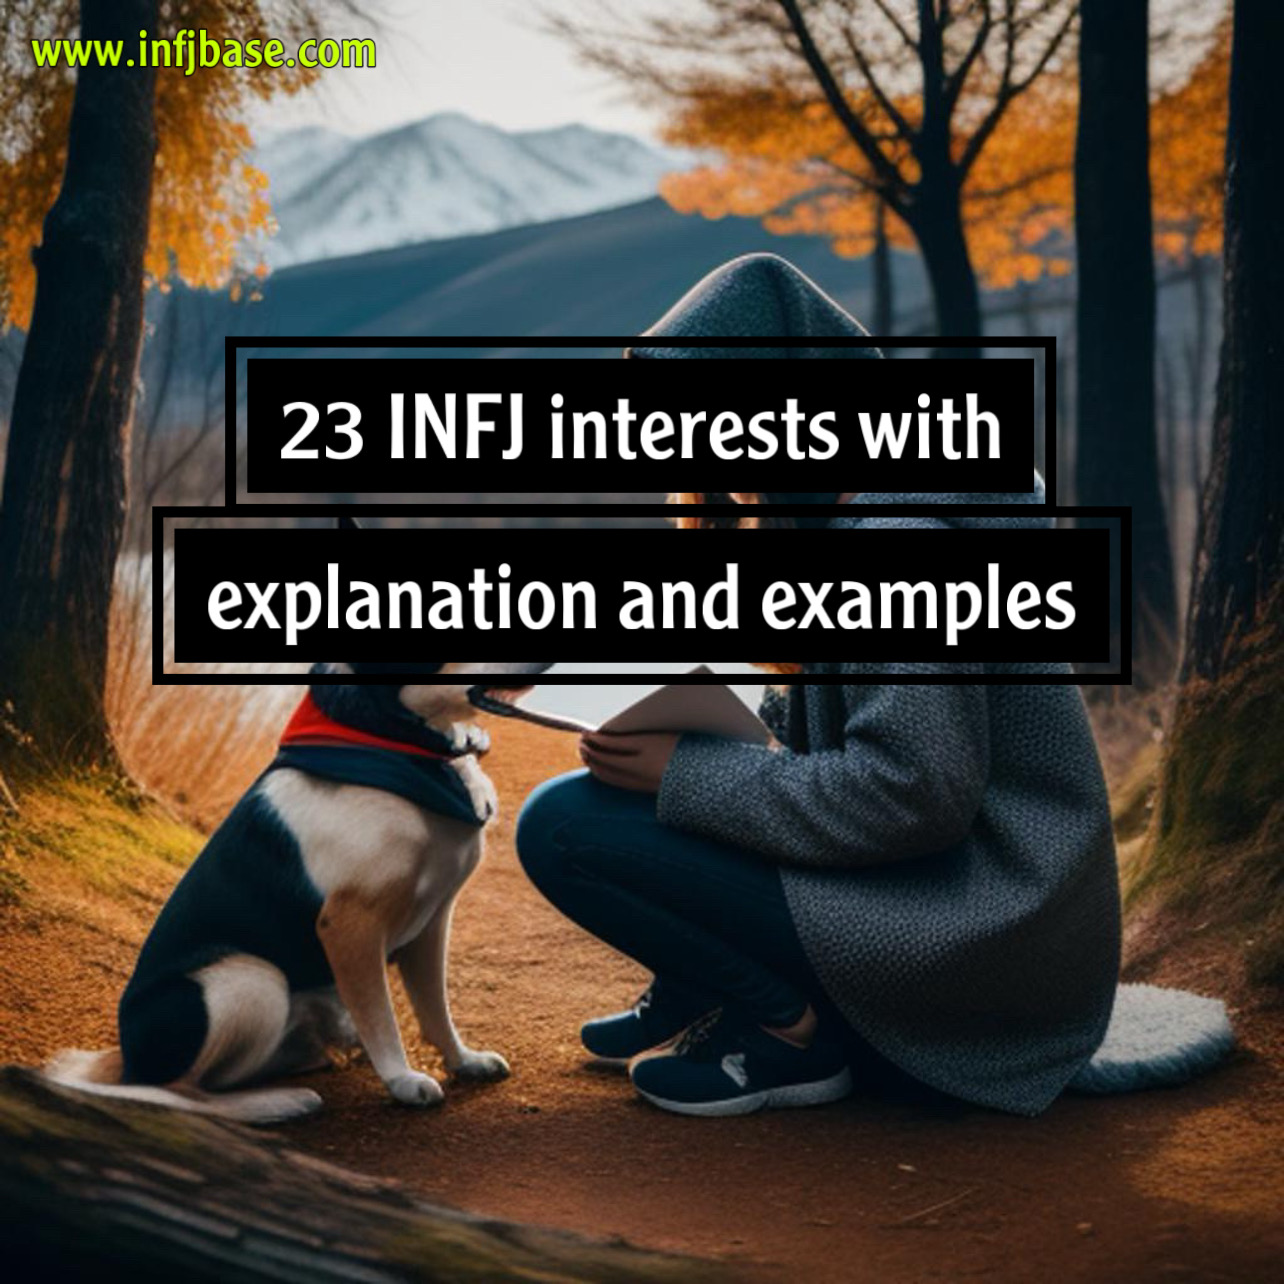 23 INFJ interests with explanation and examples